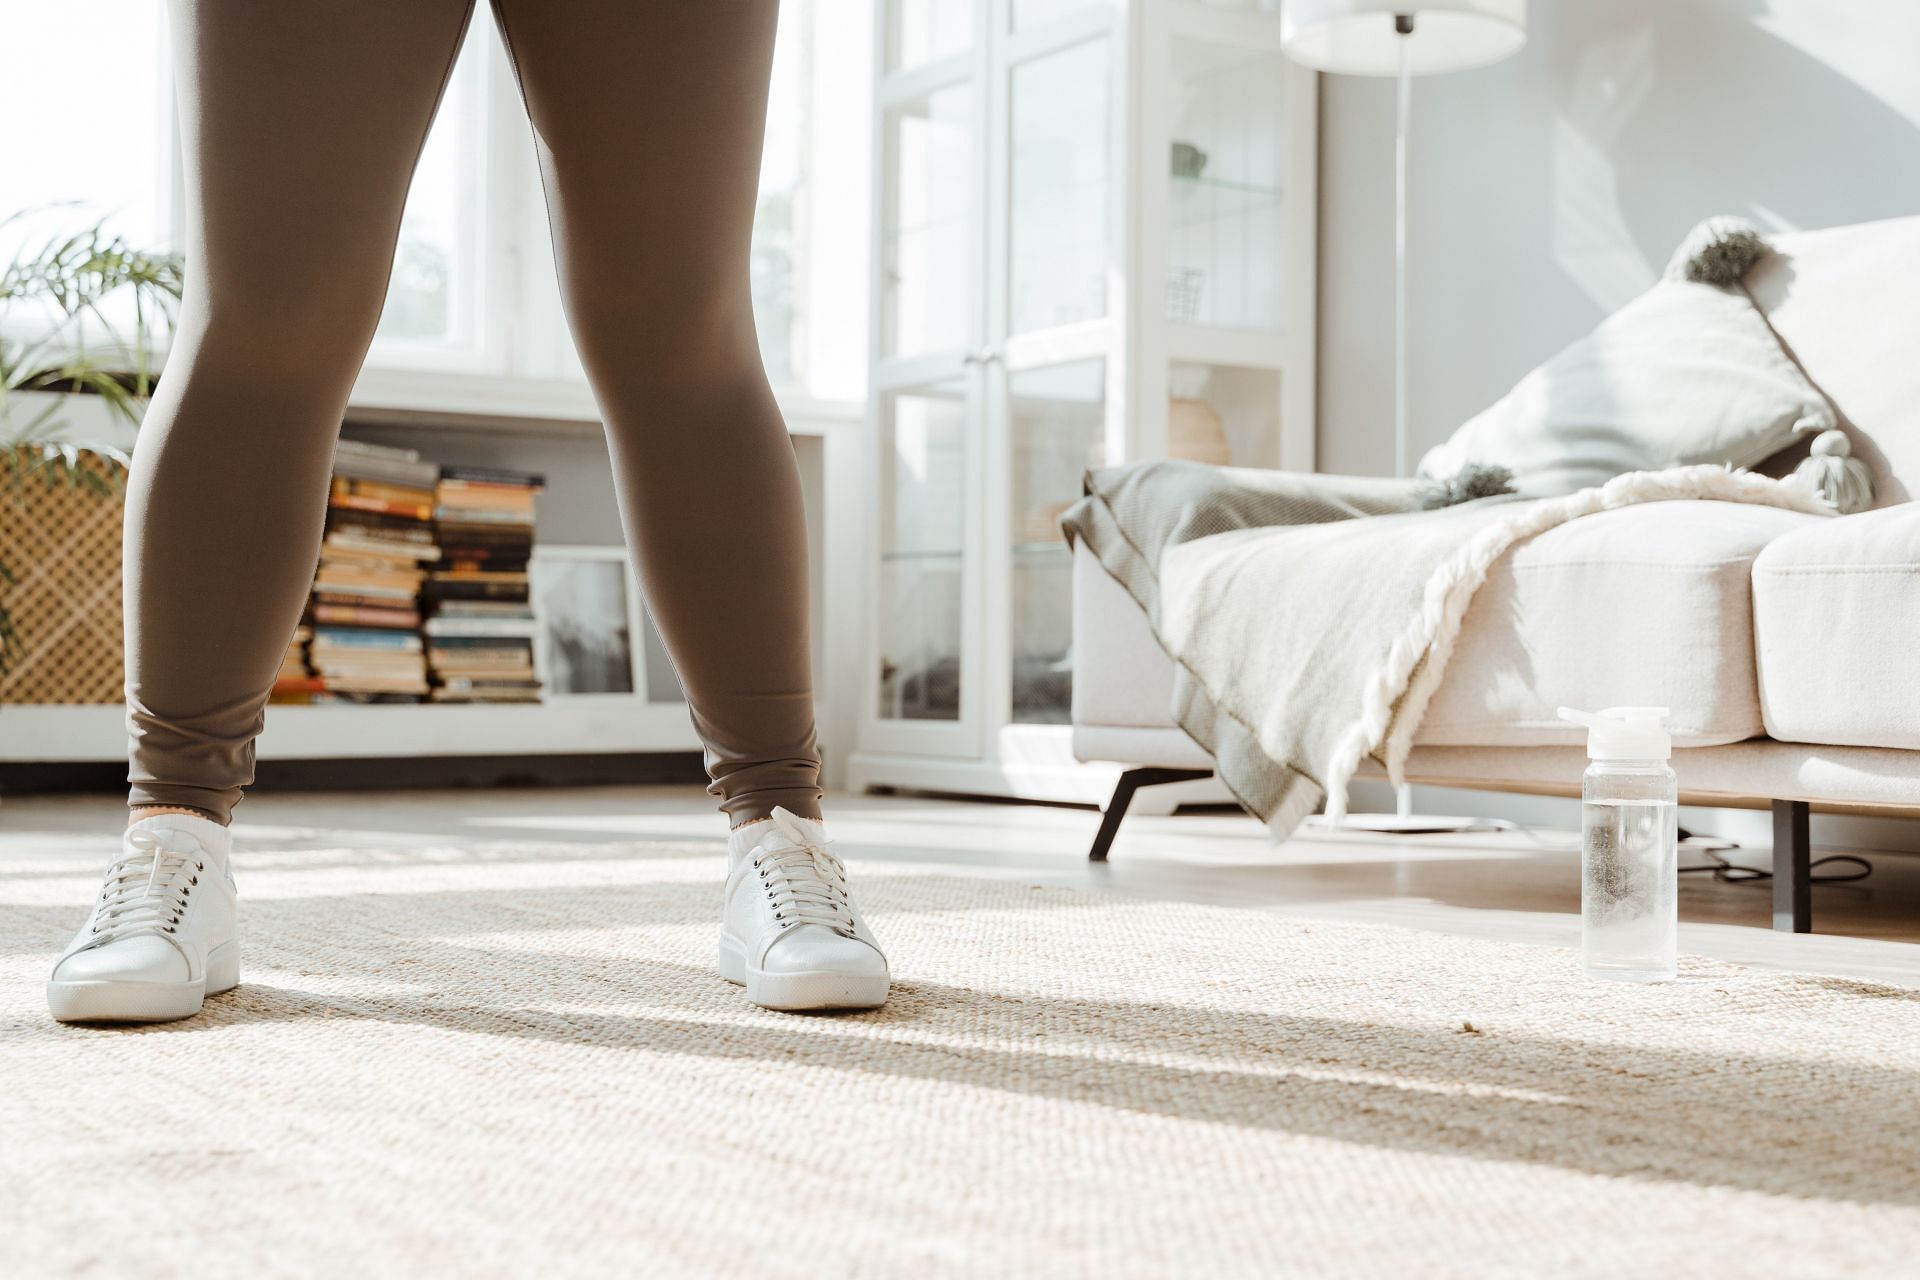 Want to lose calf fat? Try these five effective exercises. (Image via Pexels / Mart Production)